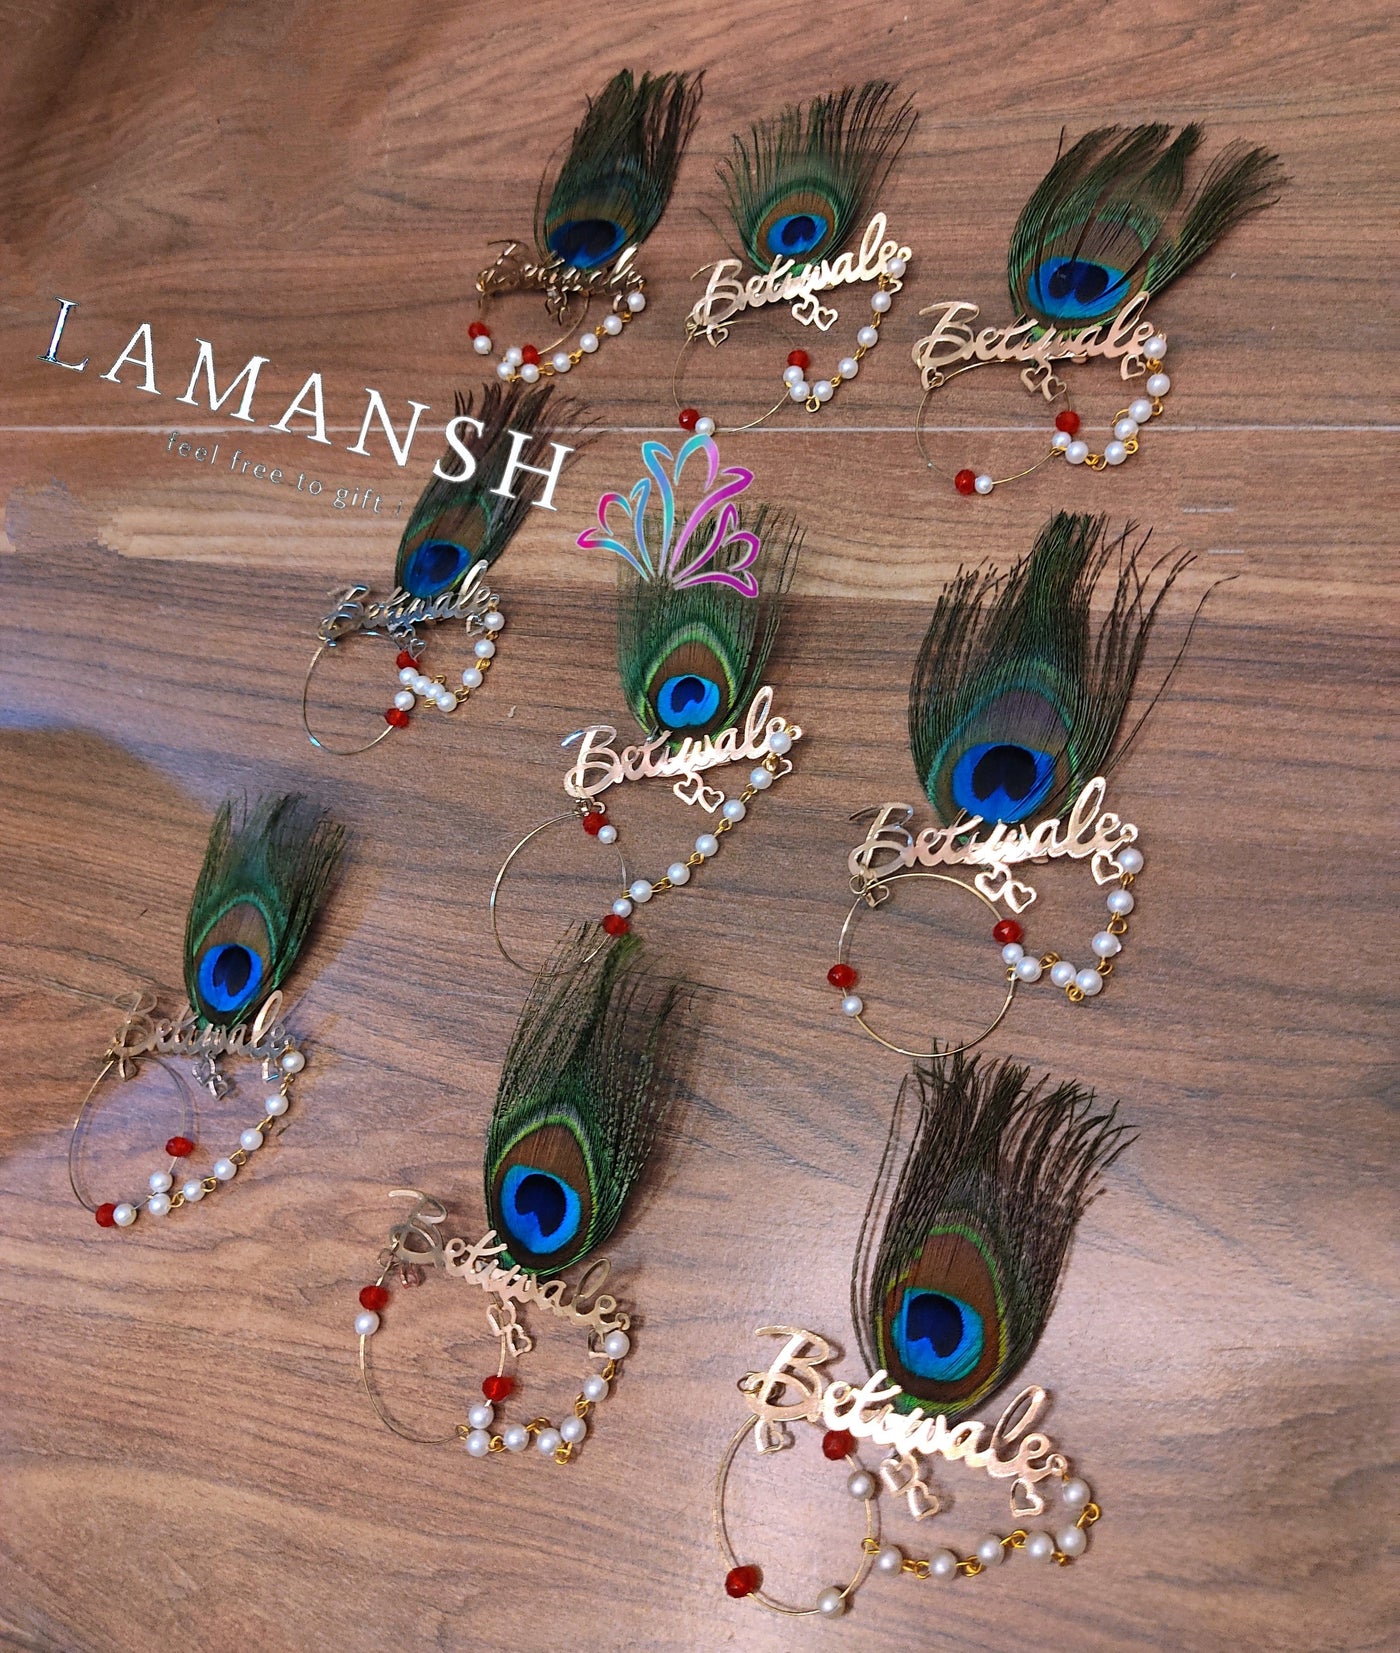 30 Rs per pc ON BUYING 🏷IN BULK Broaches LAMANSH® Betiwale Brooches with Morpankh for Barati in wedding / Brooches for Guests in Shaadi🎉